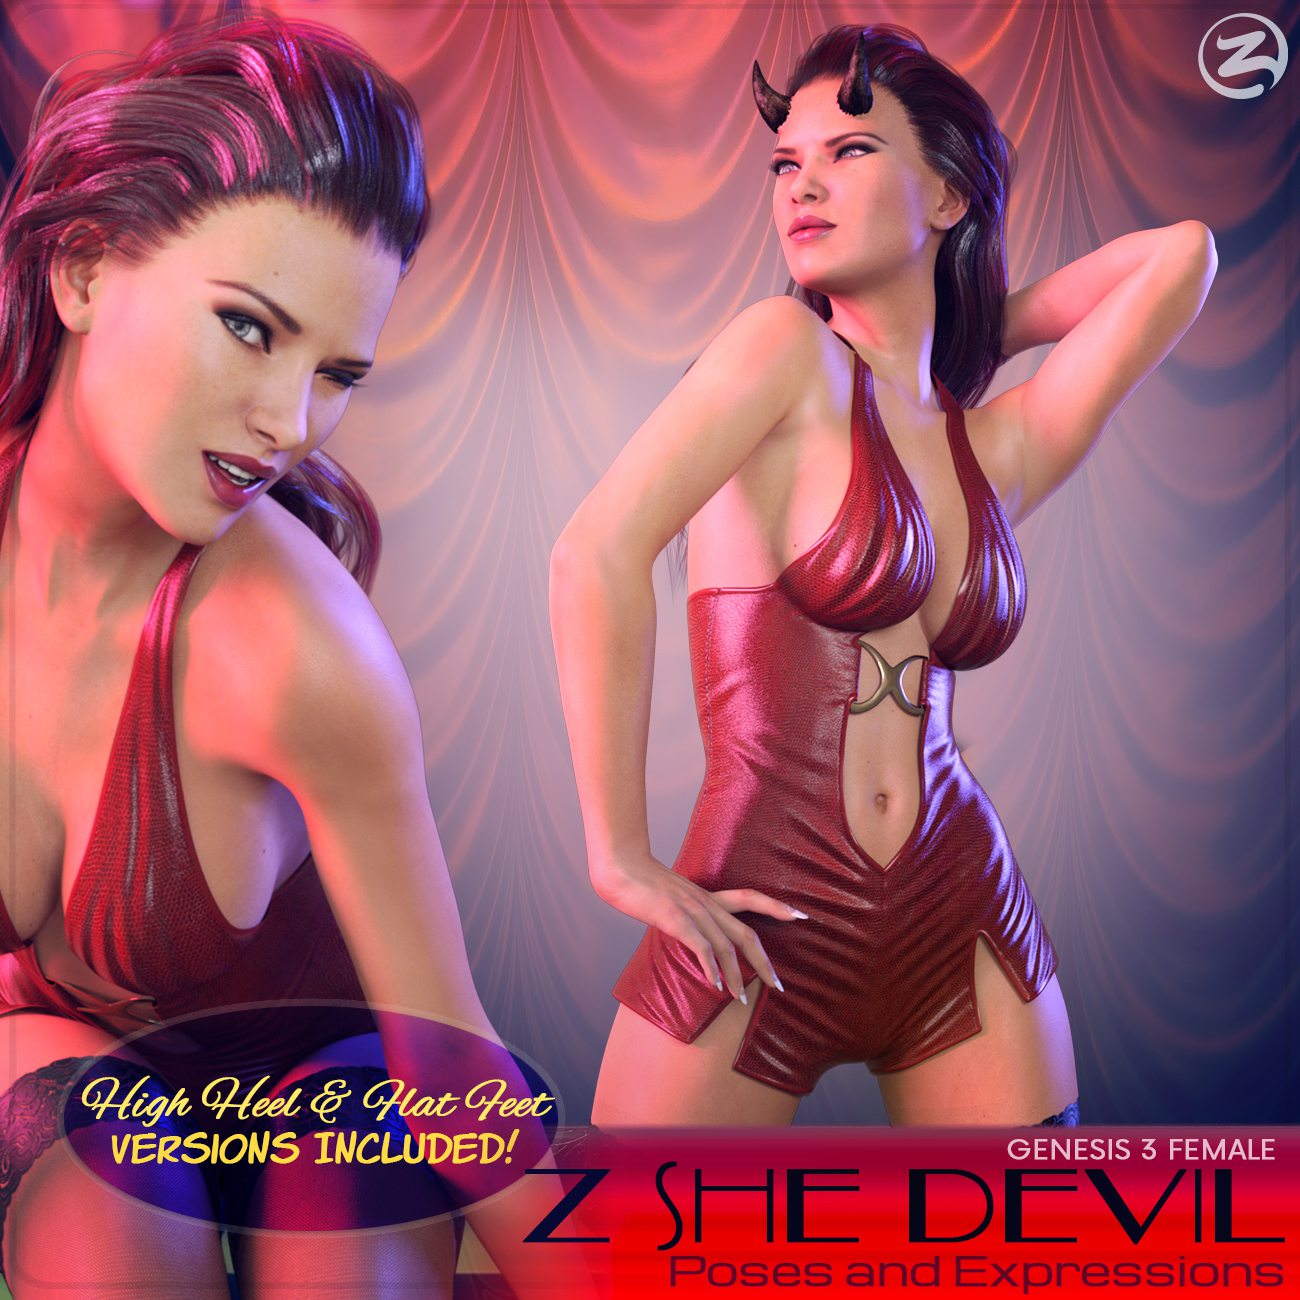 Z She Devil – Poses and Expressions for Genesis 3 Female / Victoria 7_DAZ3D下载站